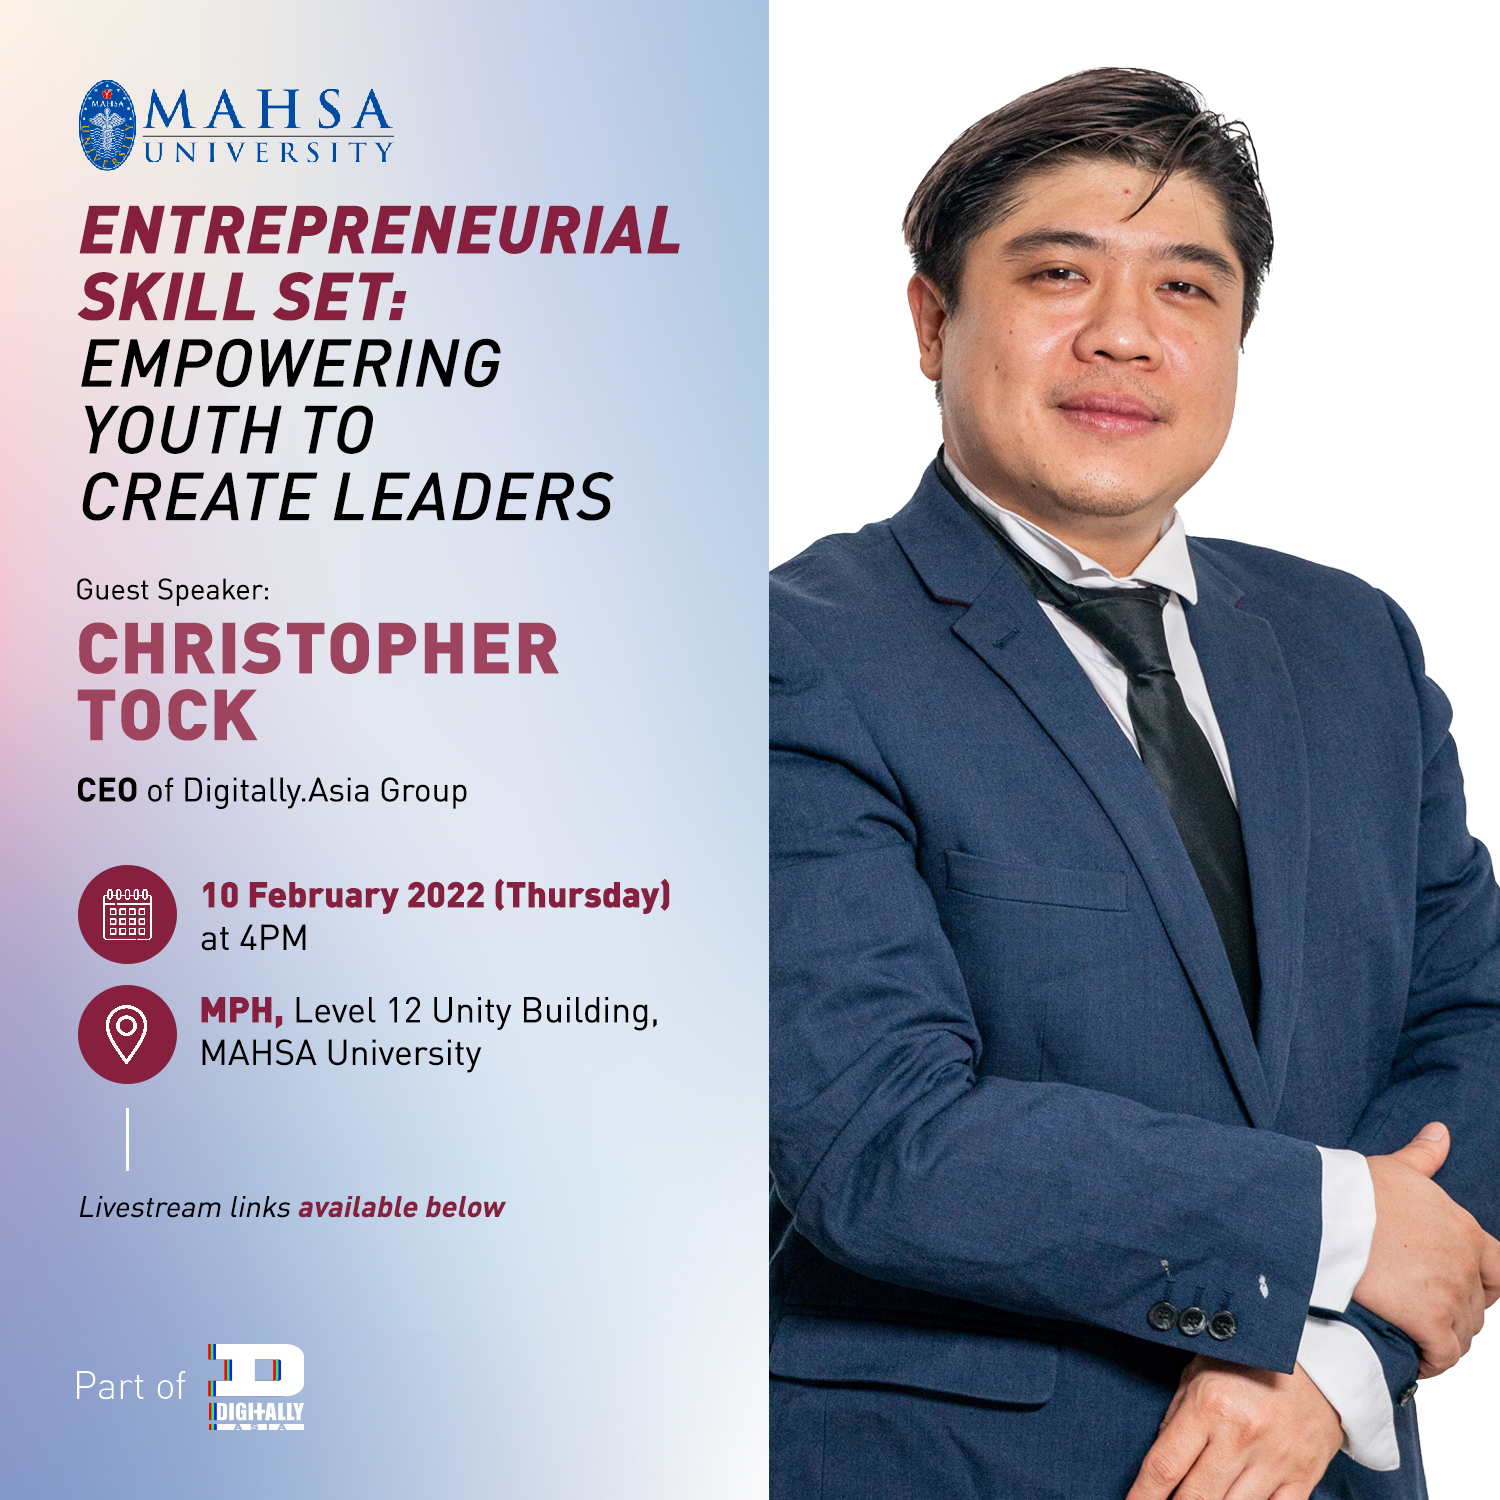 Christopher Tock Is Invited as Guest Speaker for MAHSA University’s Entrepreneurial Skill Set: Empowering Youth to Create Leaders